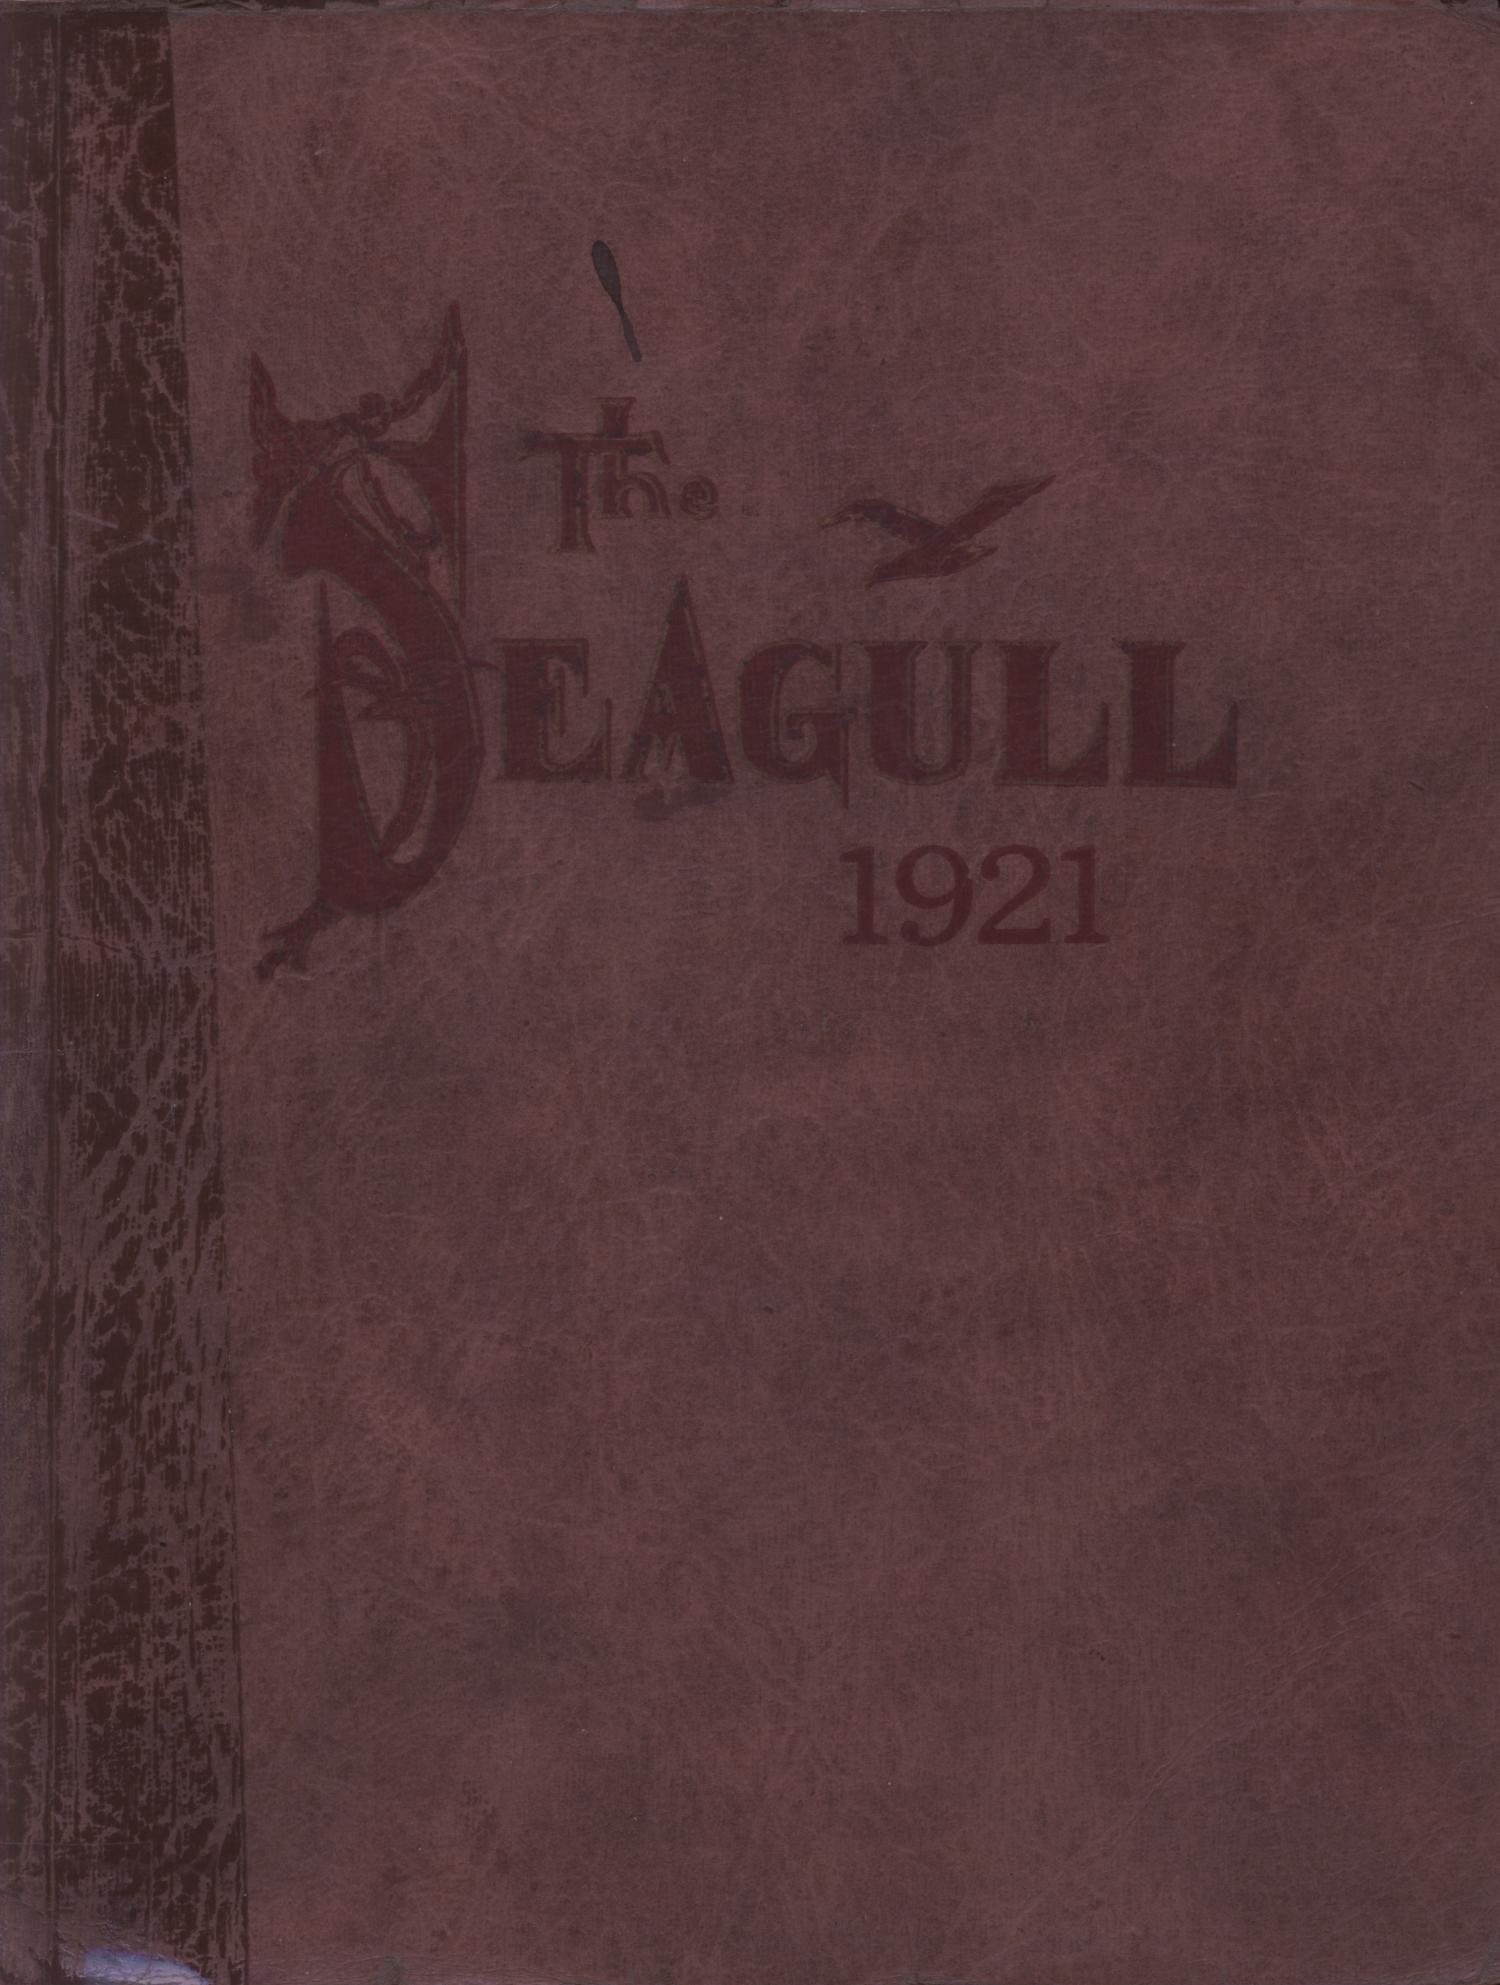 The Seagull, Yearbook of Port Arthur High School, 1921
                                                
                                                    Front Cover
                                                